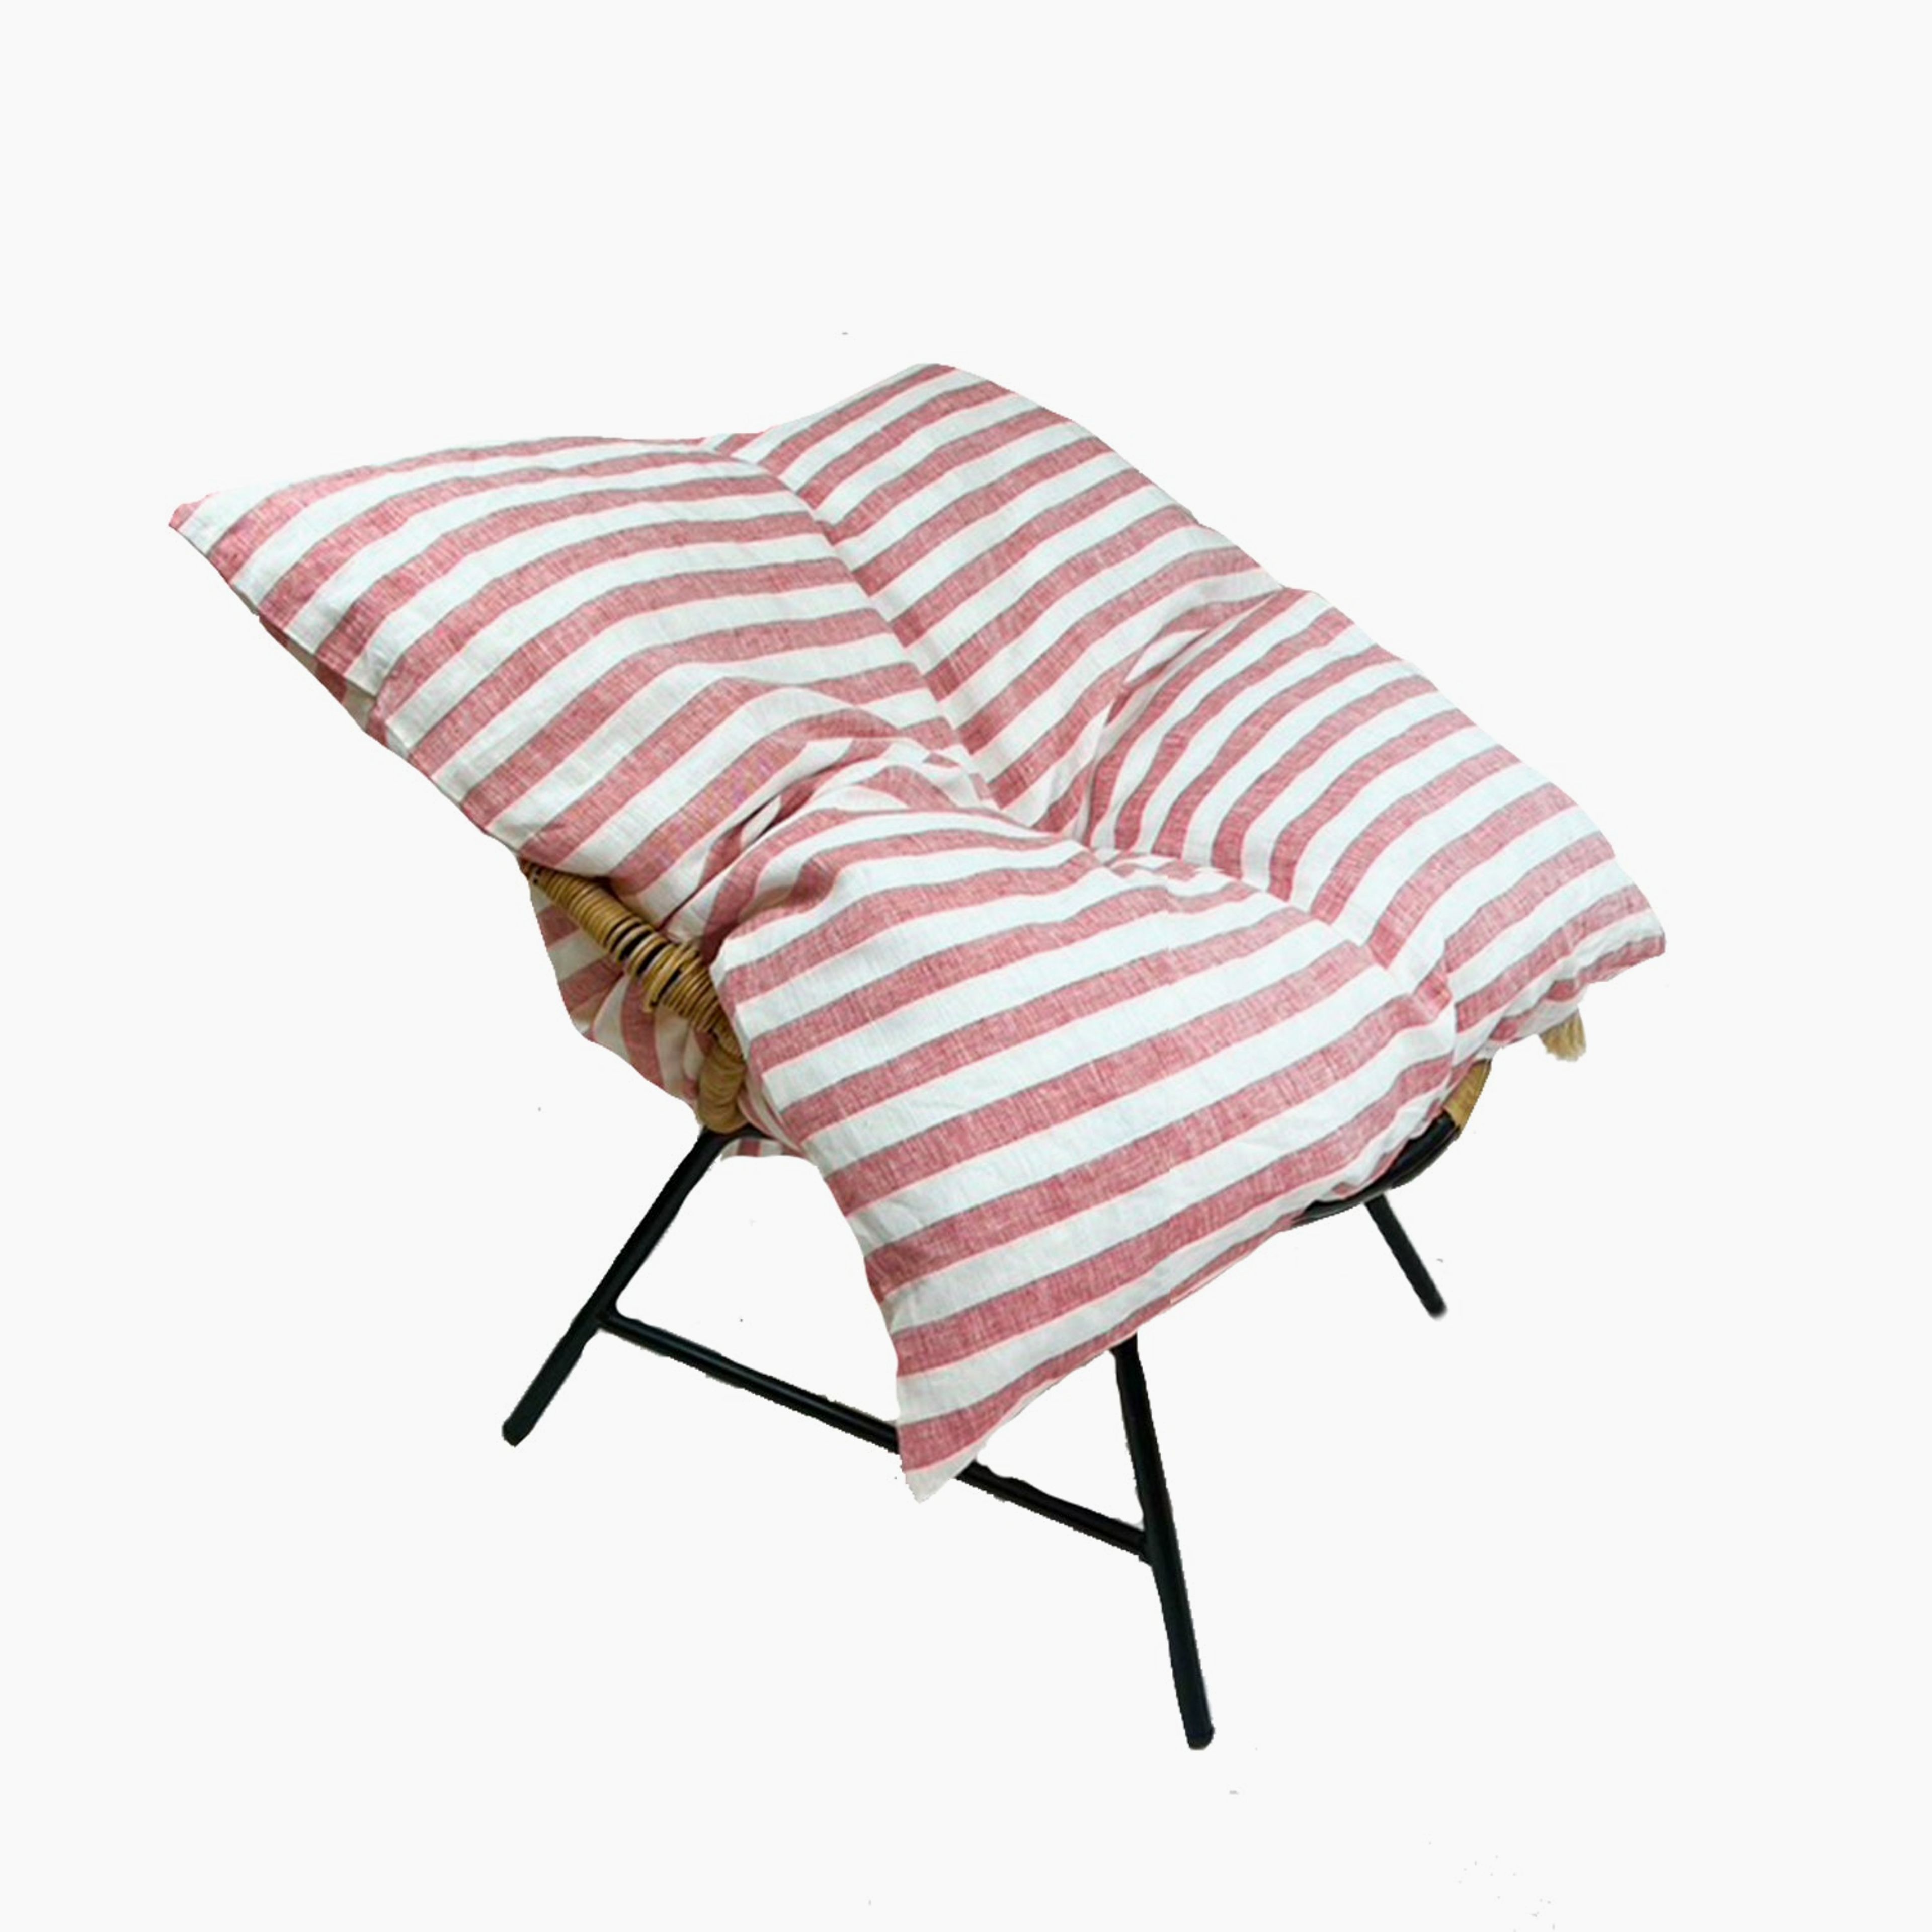 Mini Cover Throwbed in Sur La Mer Red